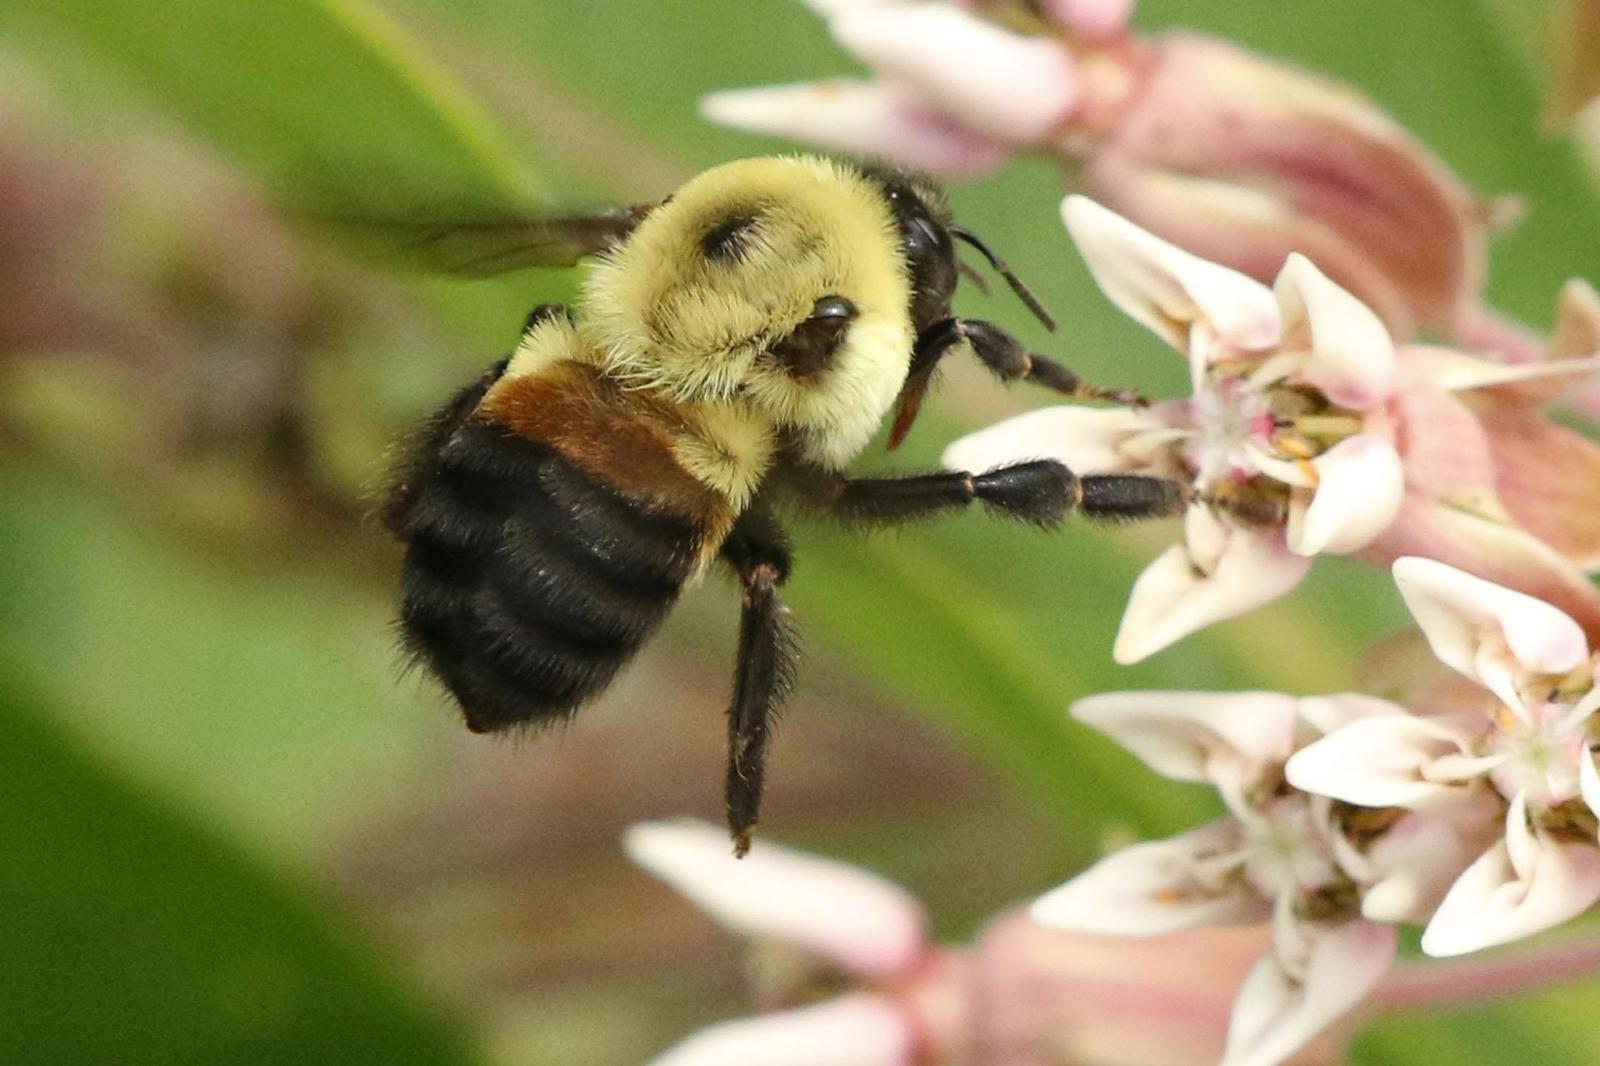 Brown-belted bumble bee Photo by Kristy Baker